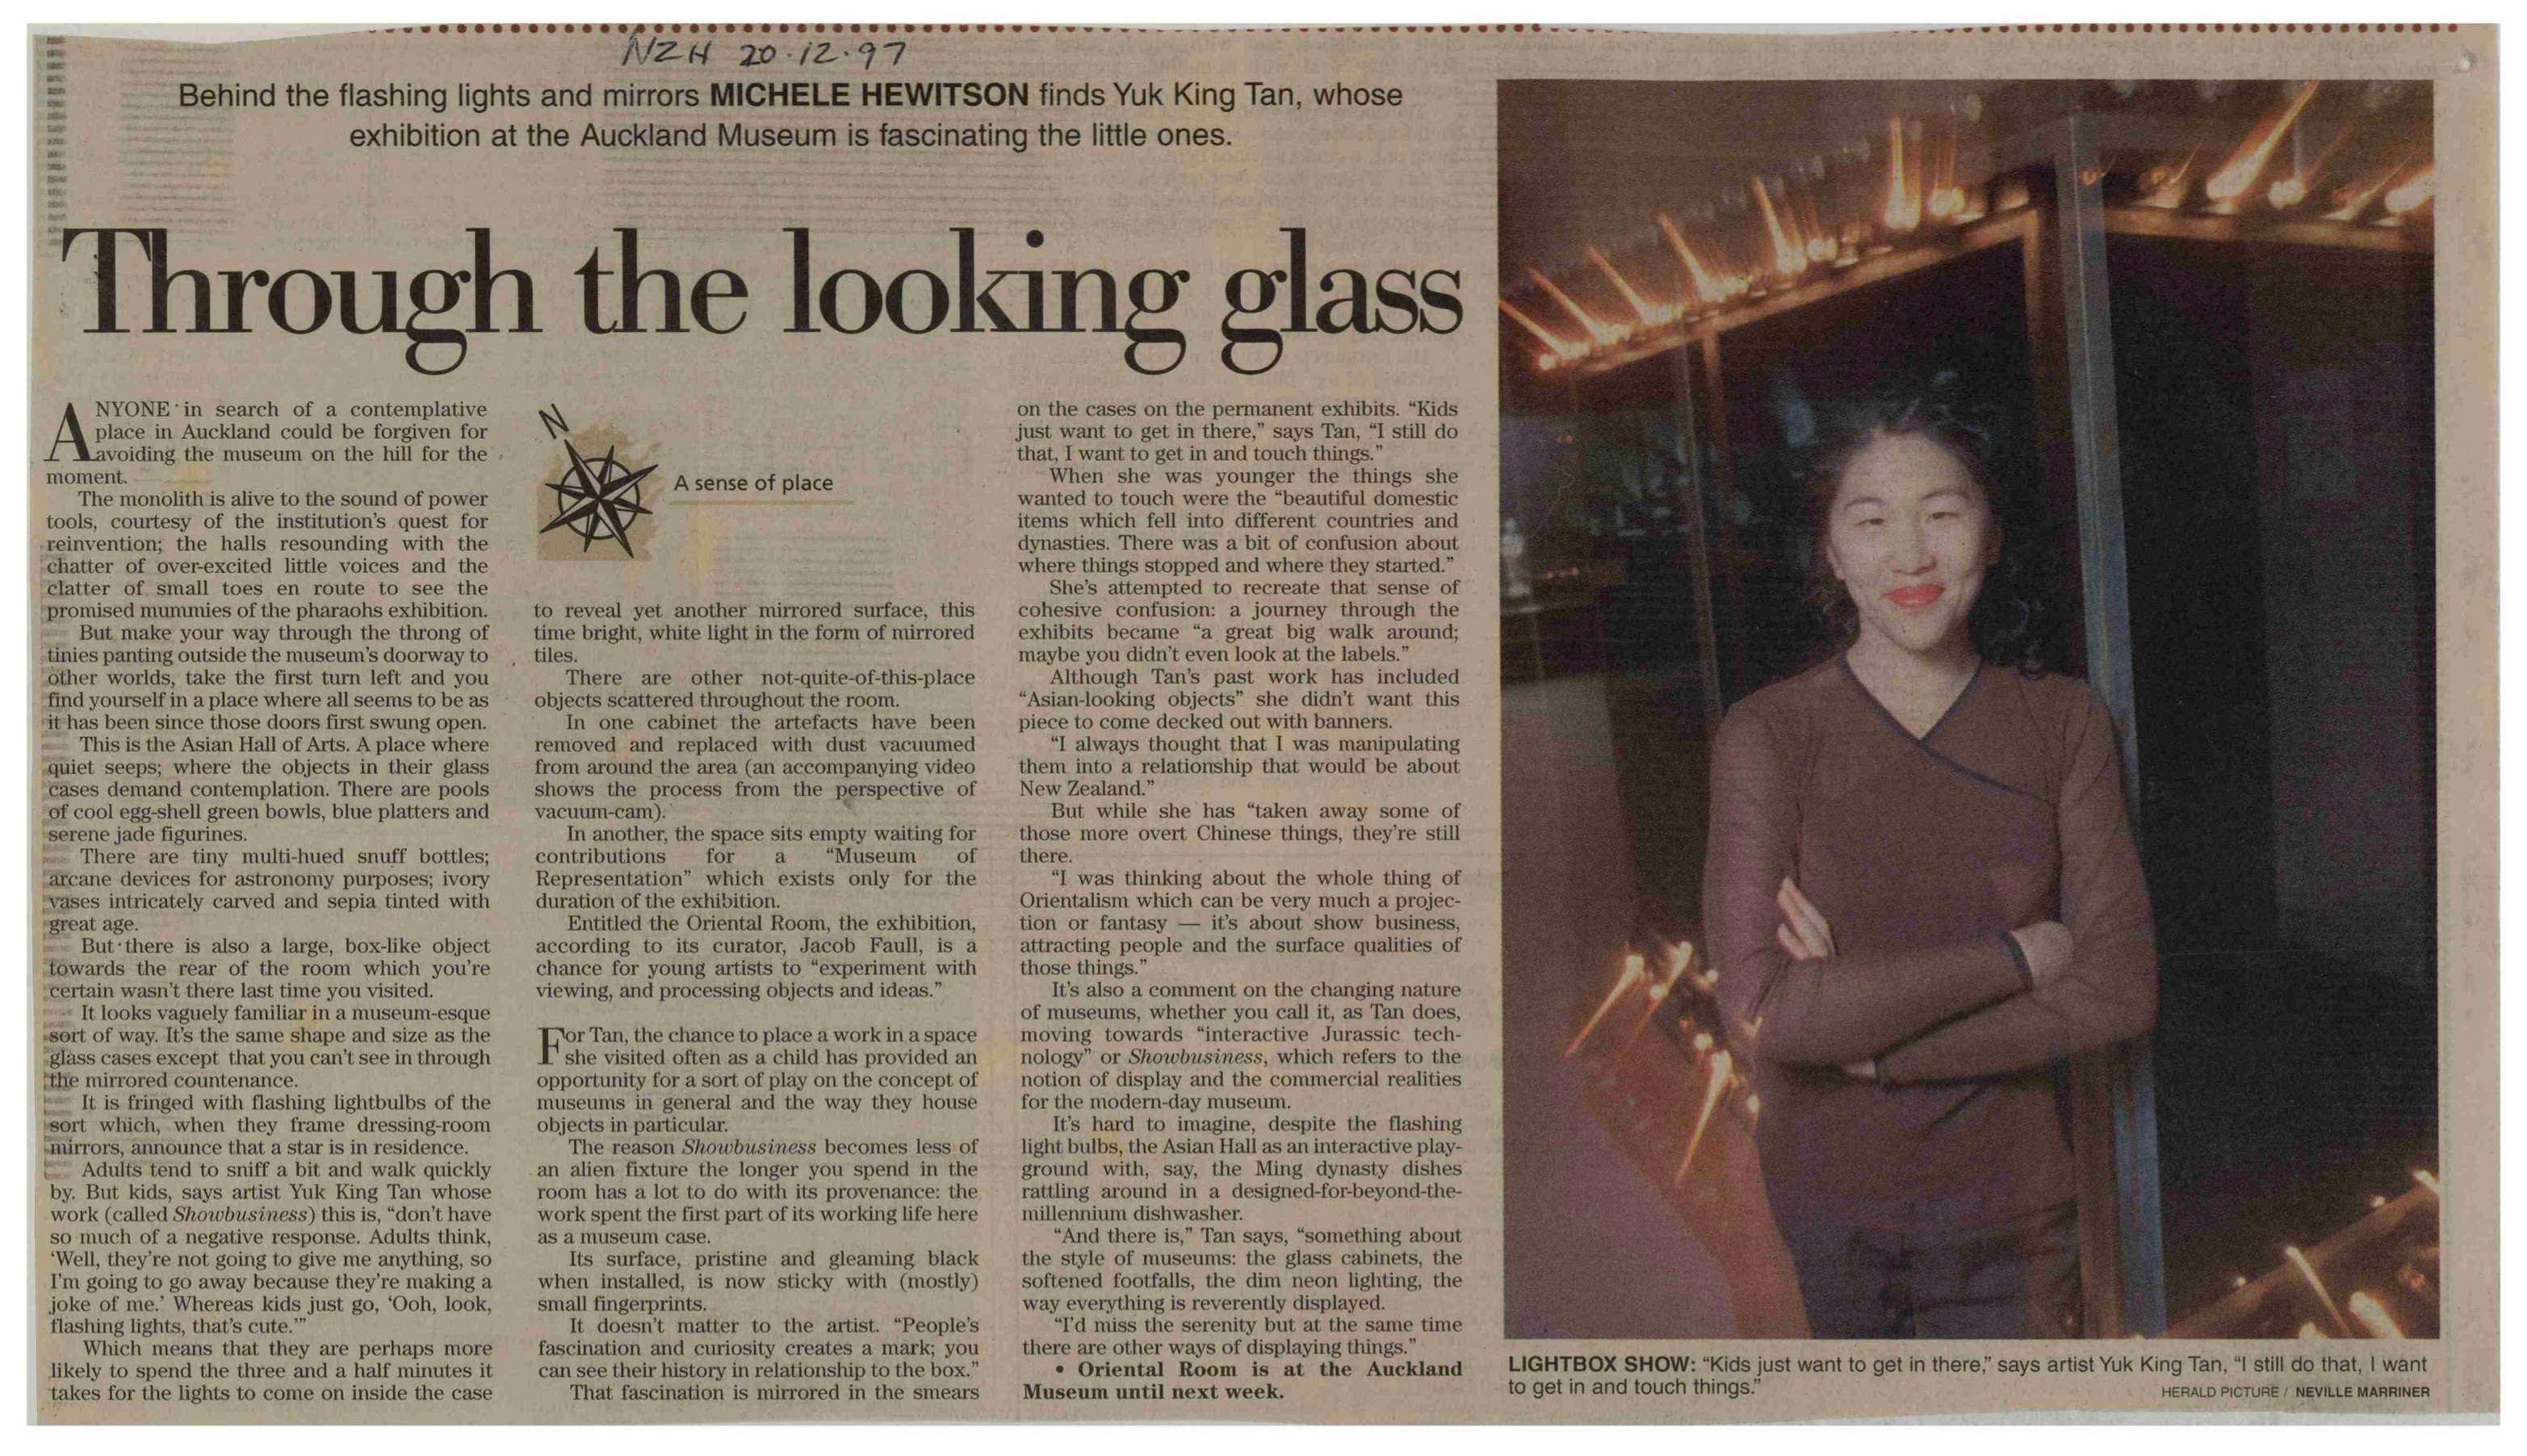 Newspaper clipping with photo of Yuk King Tan with arms crossed in front of a lit-up artwork in the museum.